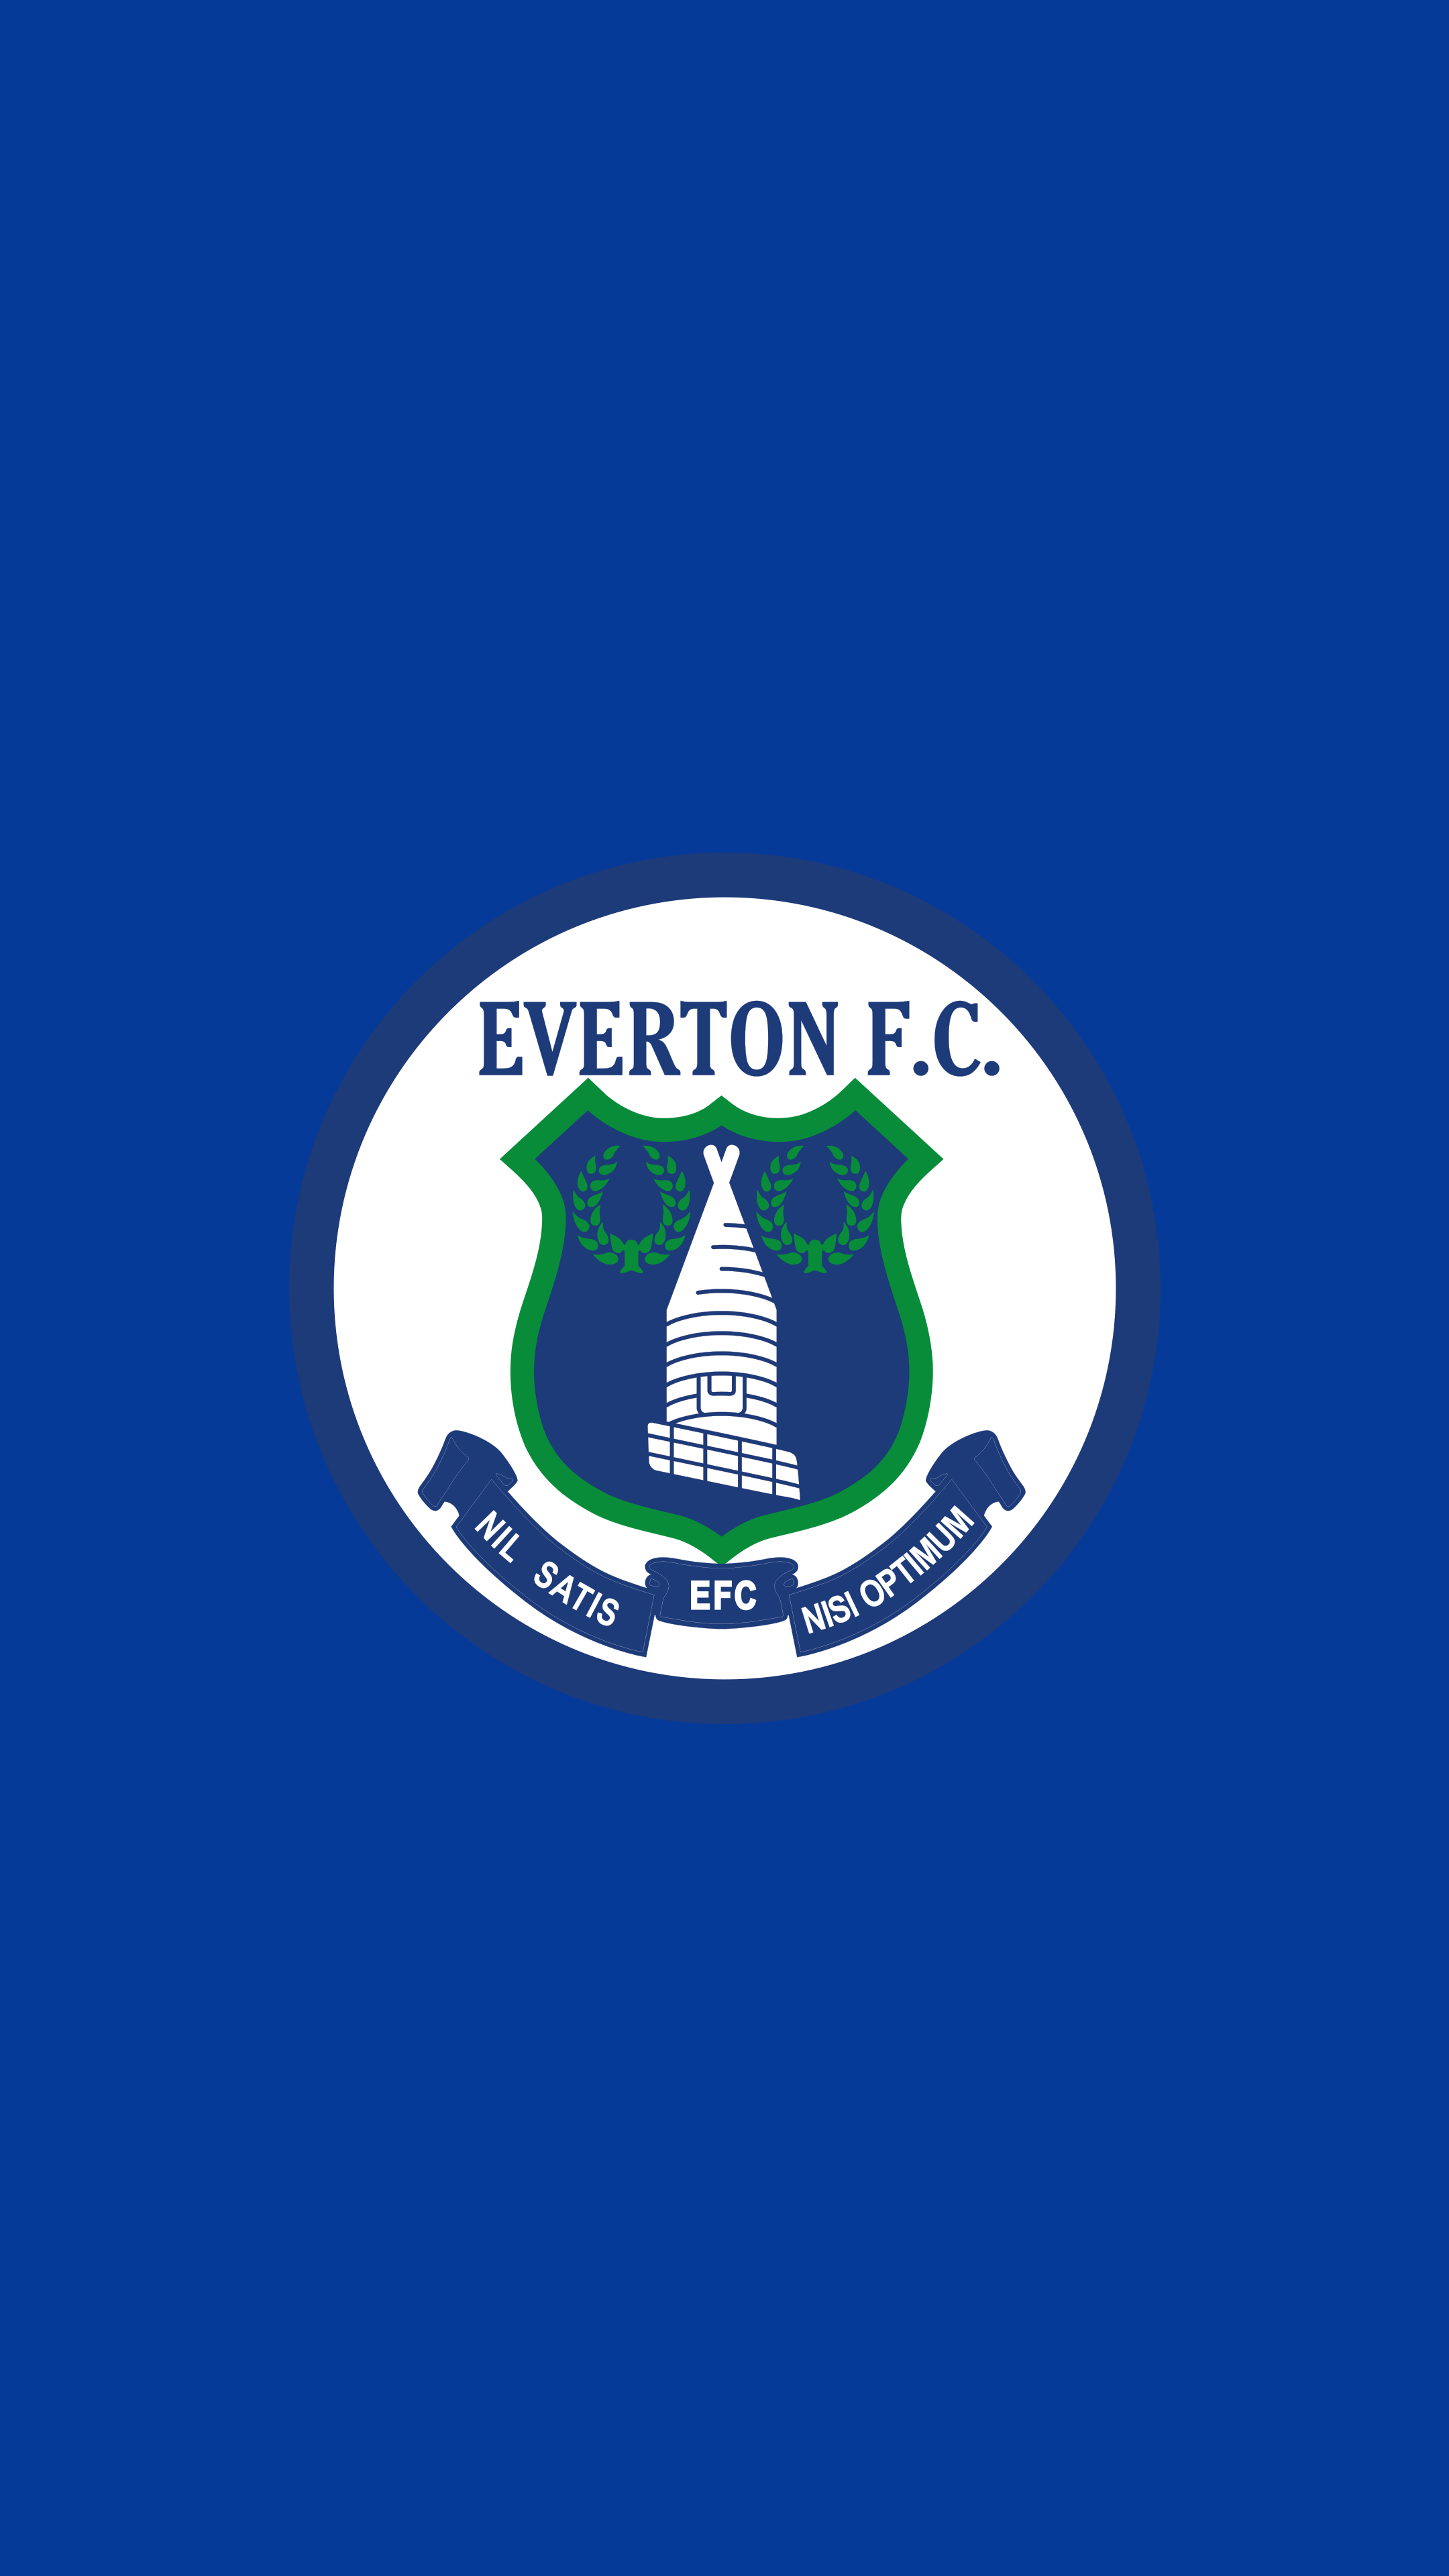 Everton Fc Wallpaper 71 Image In Collection Page